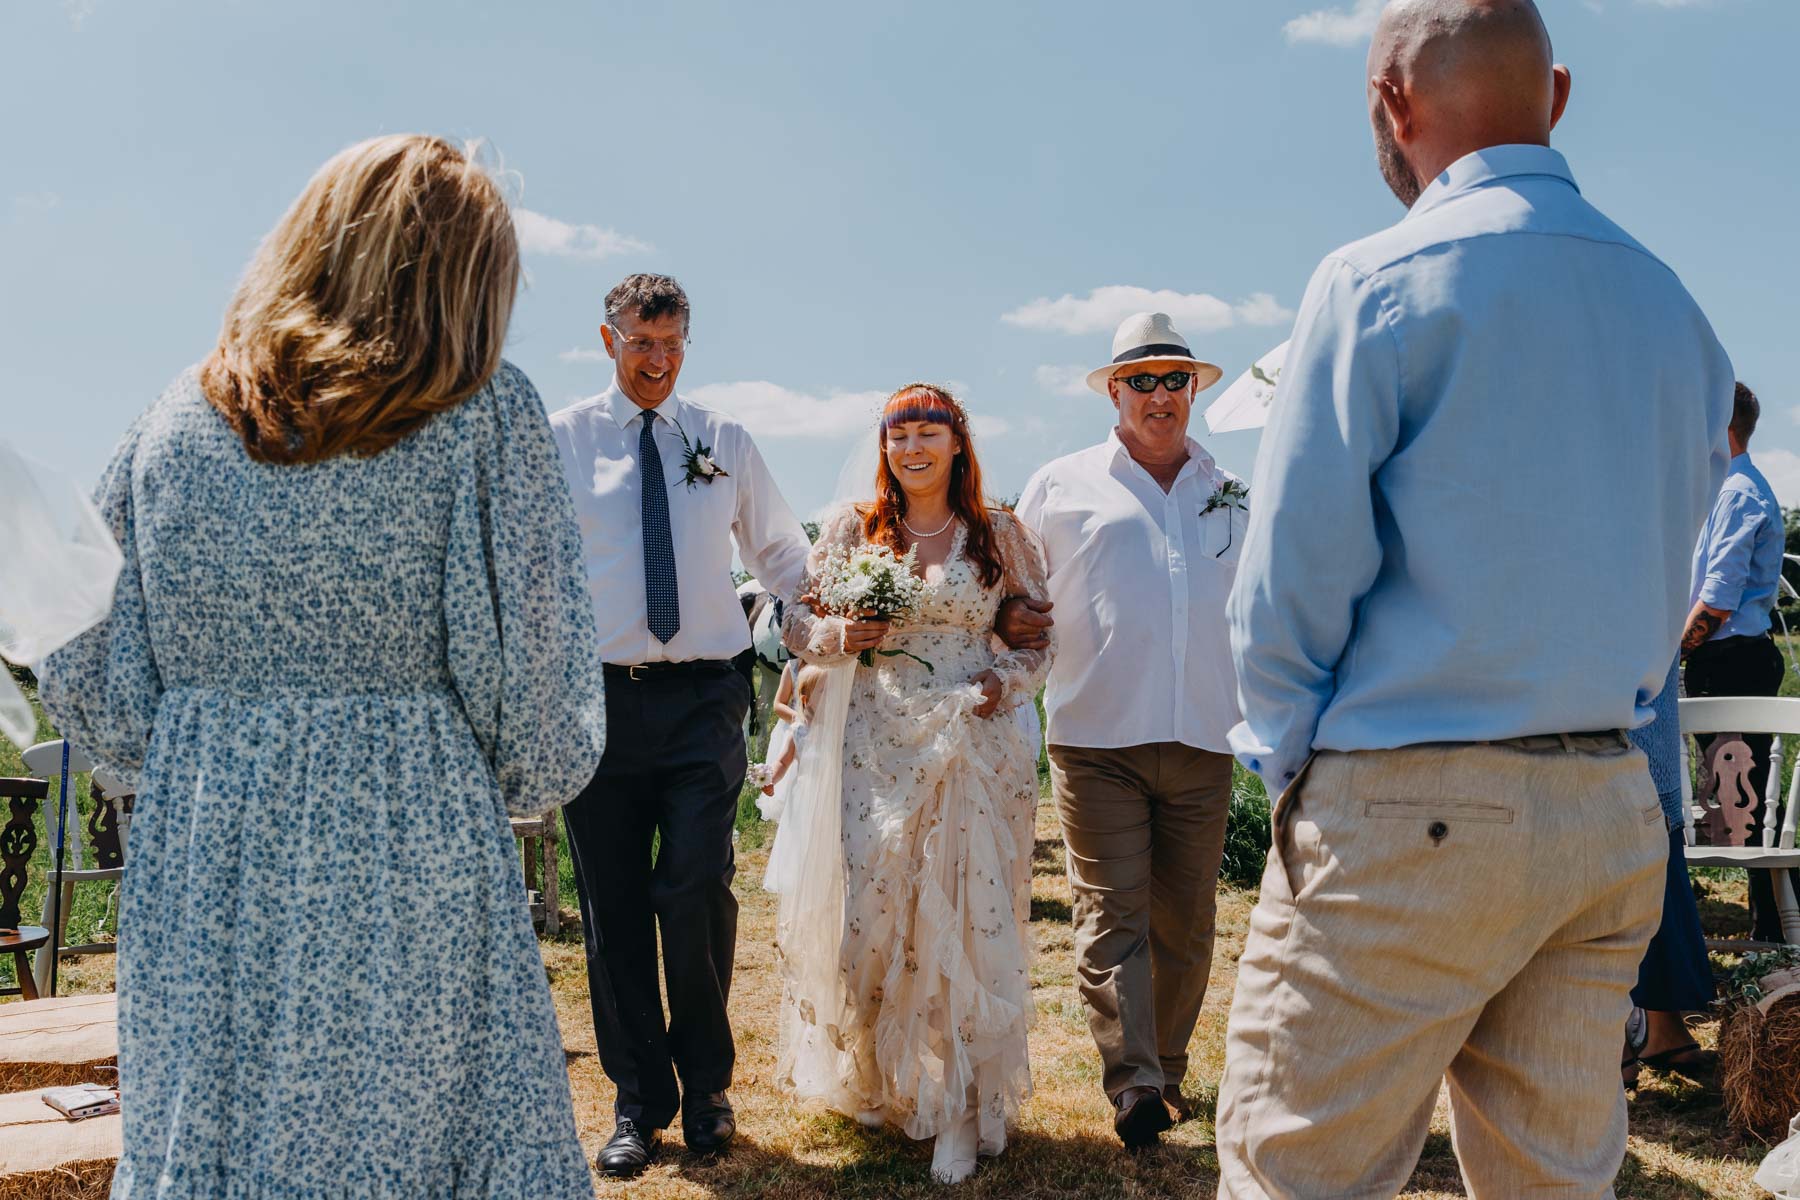 The bride with her father and stepfather approaches the groom and their celebrant of the handfasting ceremony. Handfasting ceremony photography reportage